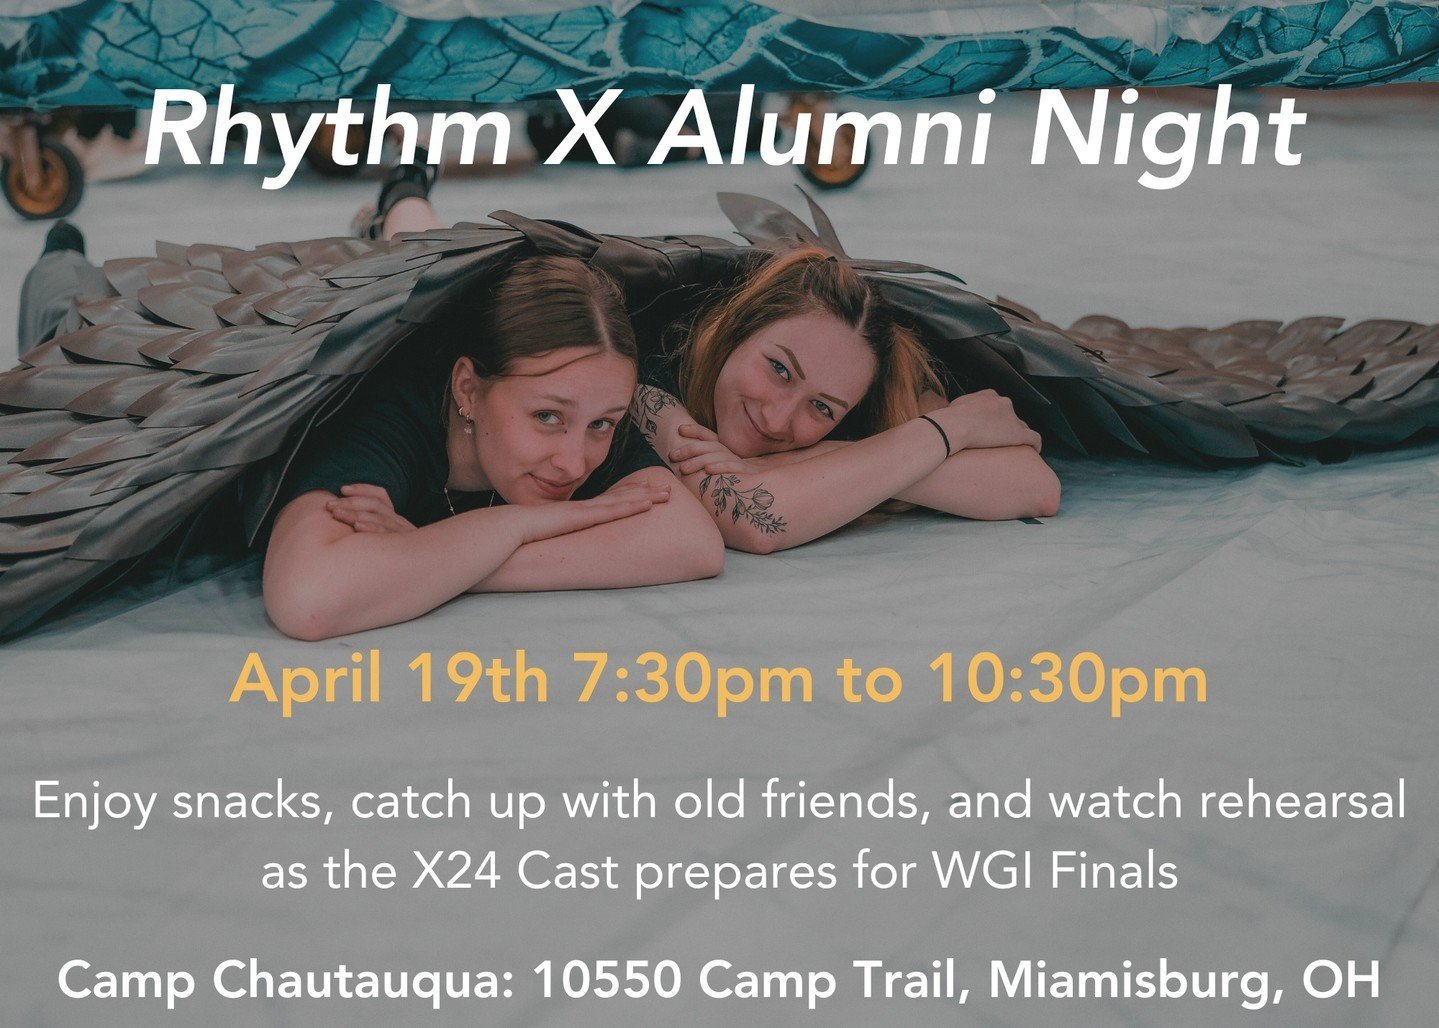 🗣️📣 CALLING ALL ALUMNI!

After our Semifinals performance, we are hosting an alumni night to enjoy snacks, mingle, and enjoy our last night block of the season!

Come enjoy the company of old friends and cheer on #X24 as they prepare for their WGI 